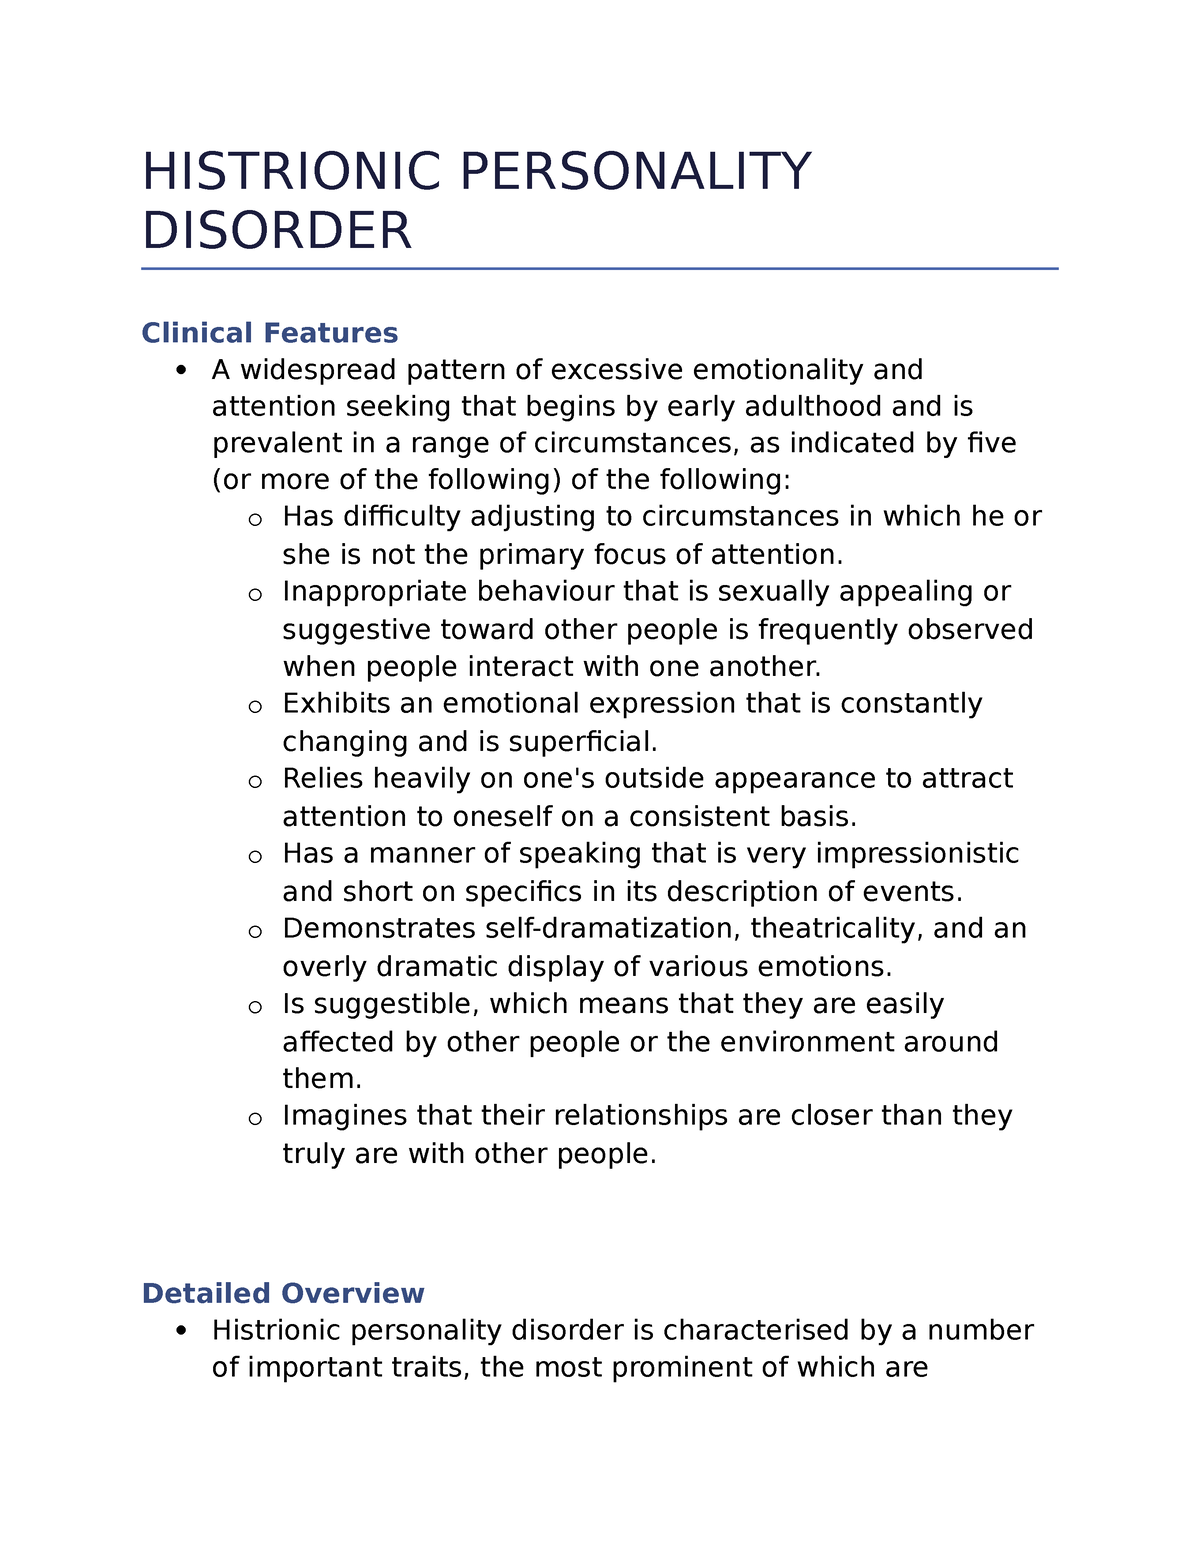 case study of someone with histrionic personality disorder